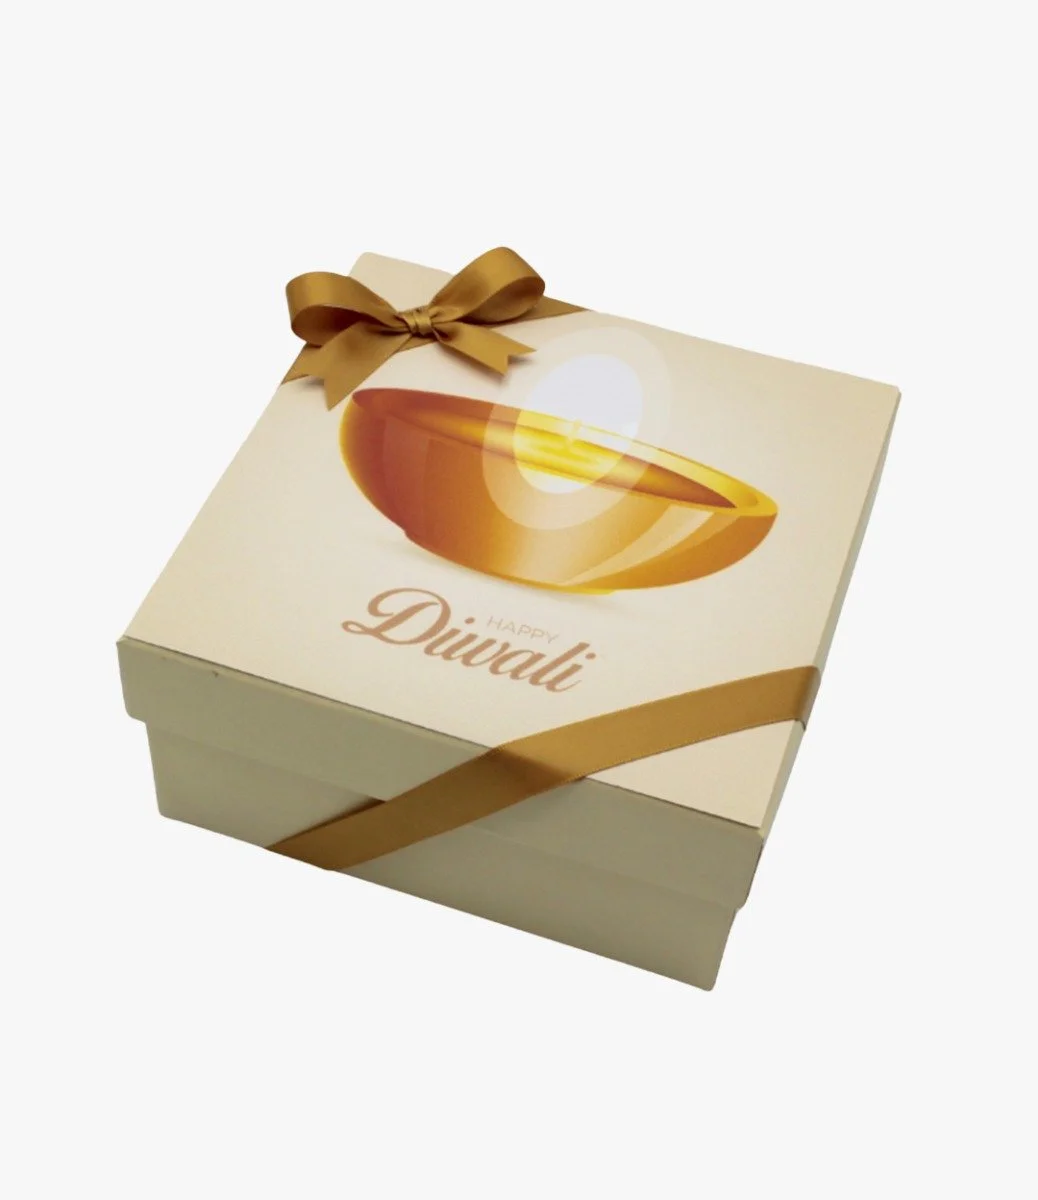 Diwali Candles Designed Chocolate Box by Le Chocolatier